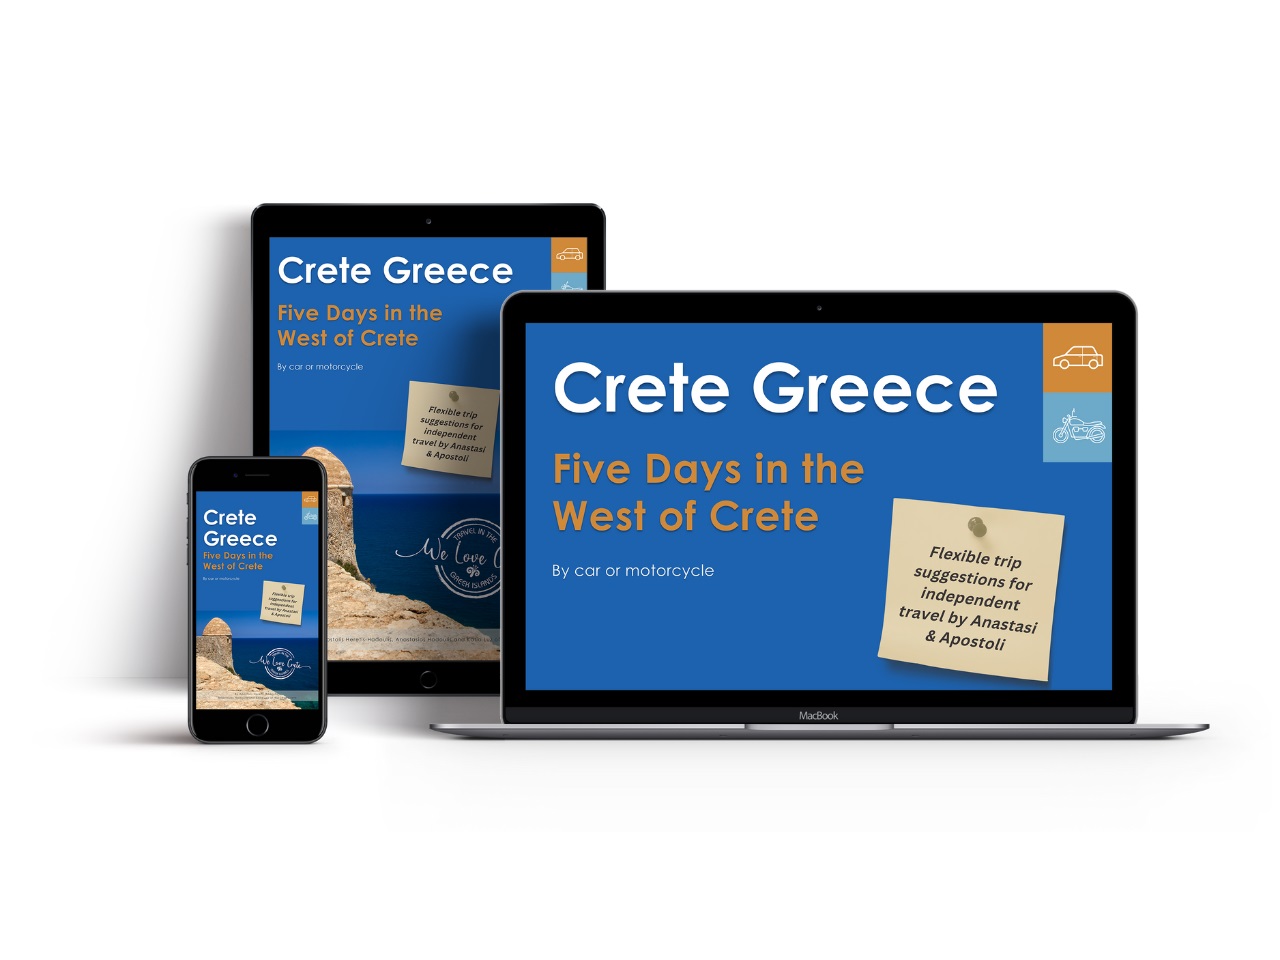 Our e-book Five Days in the West of Crete